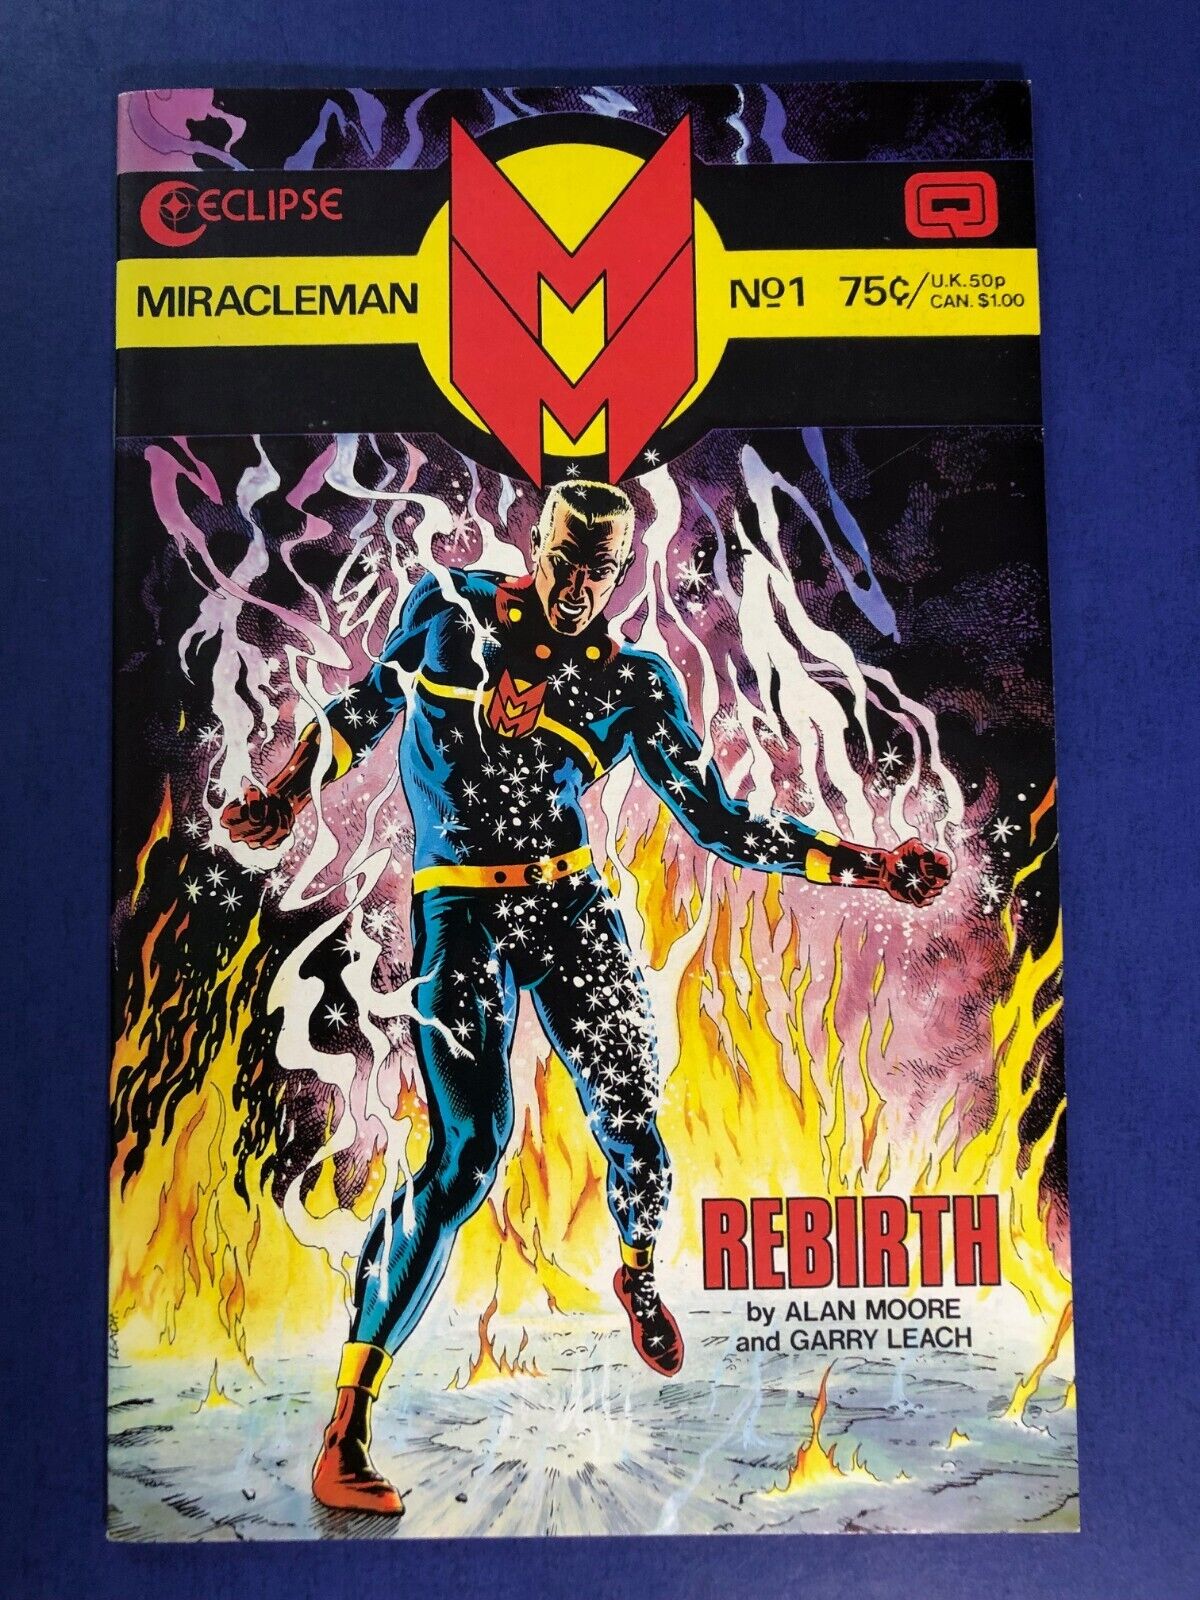 Miracleman # 1 (1985 Eclipse) Rebirth of Miracleman by Alan Moore (VF/NM)